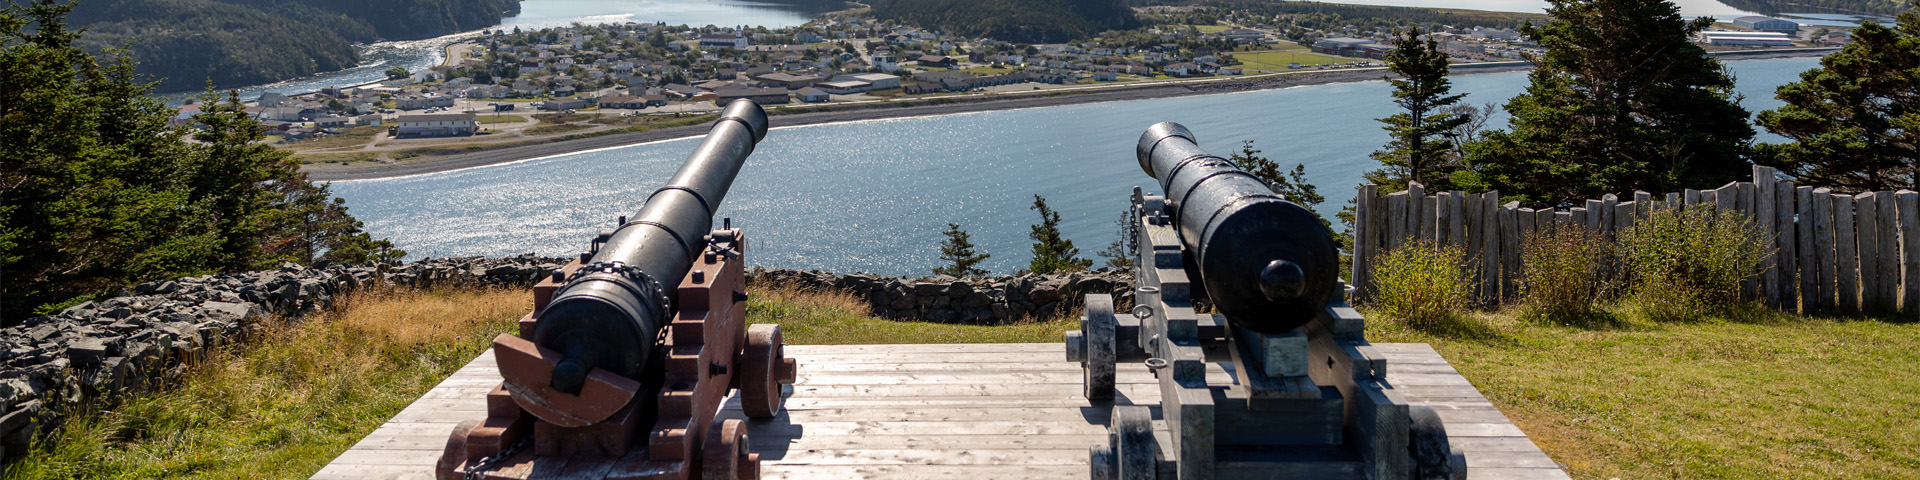 two historic cannons overlooking a coastal town